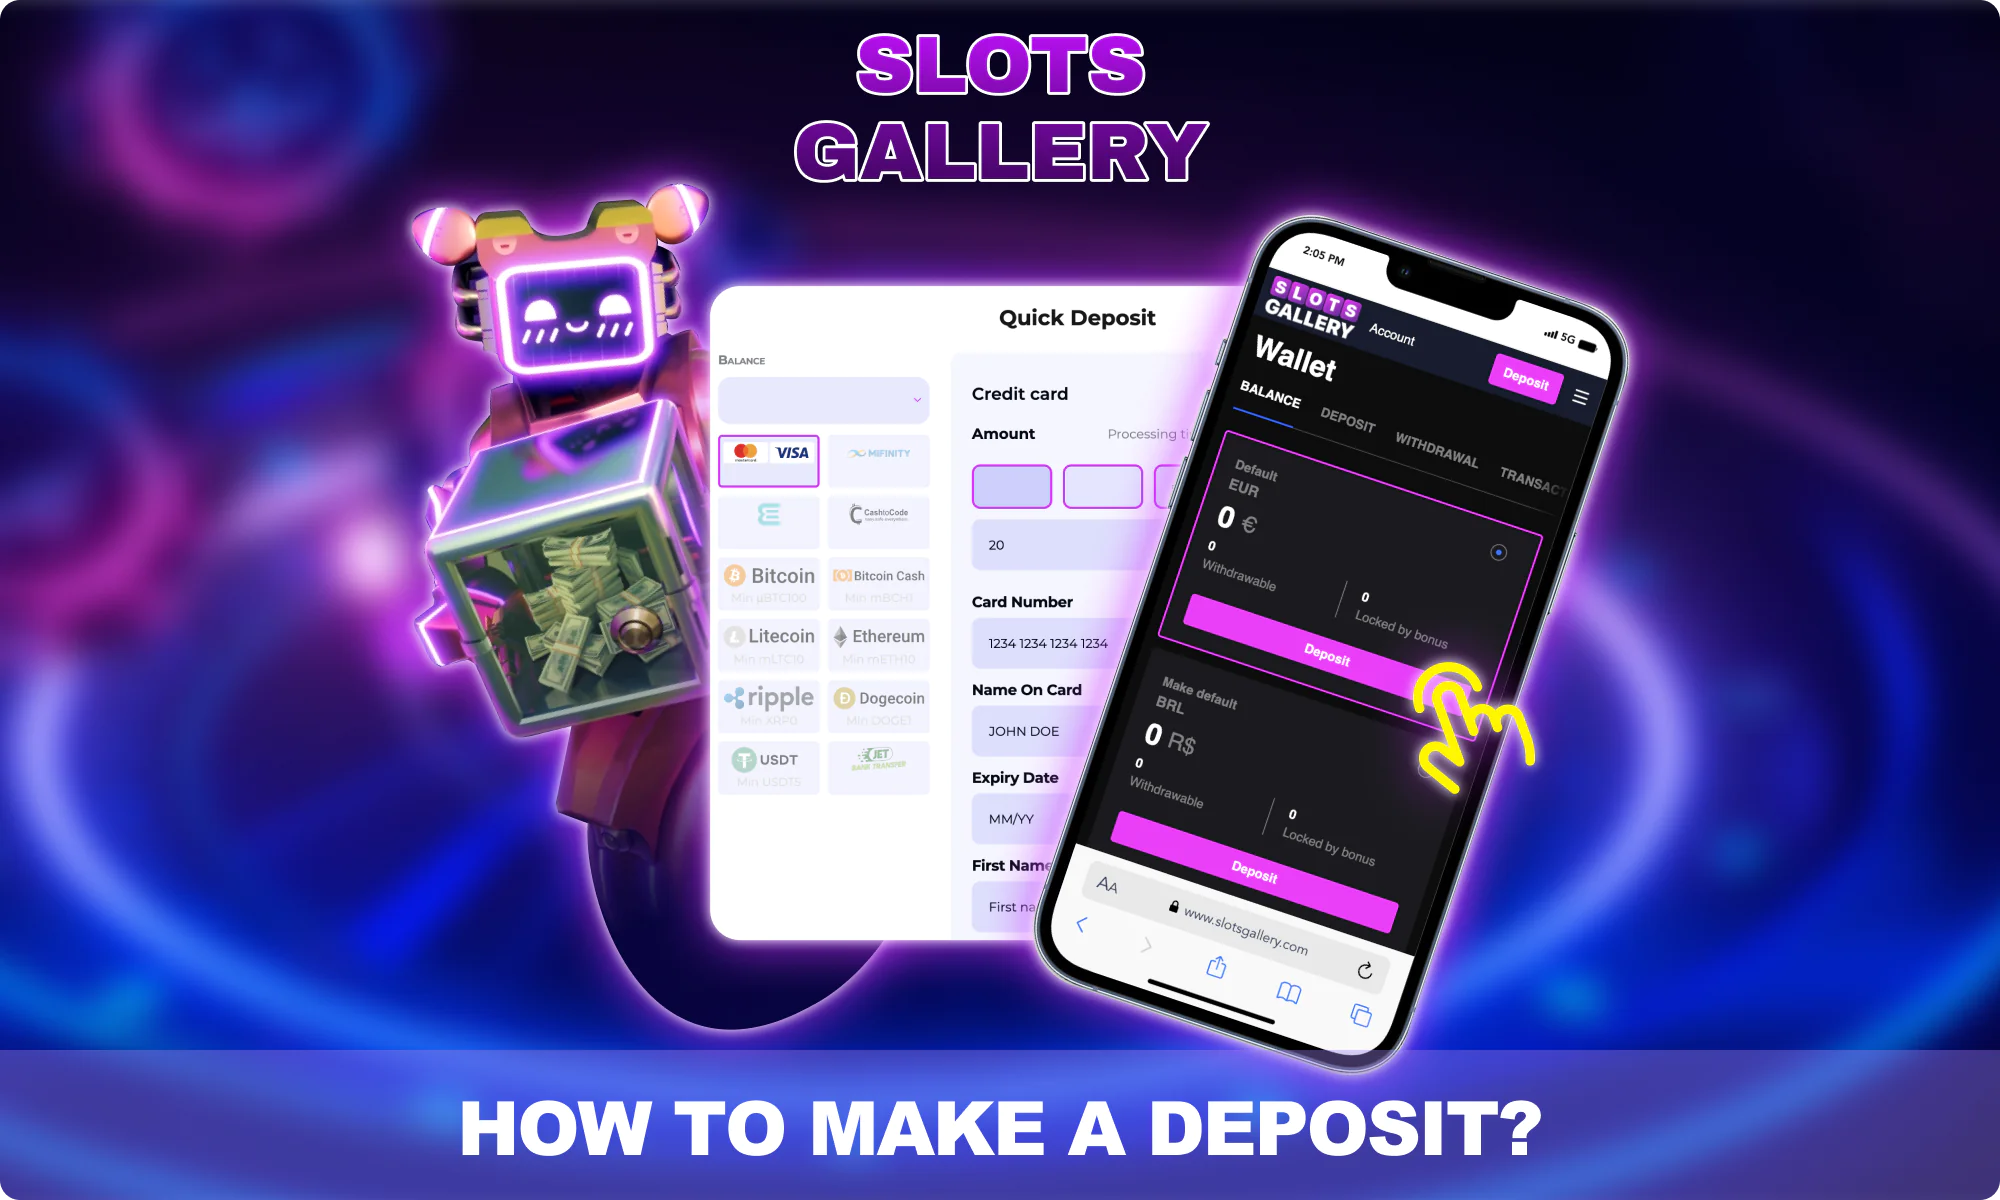 Instructions for making a deposit at Slots Gallery Casino